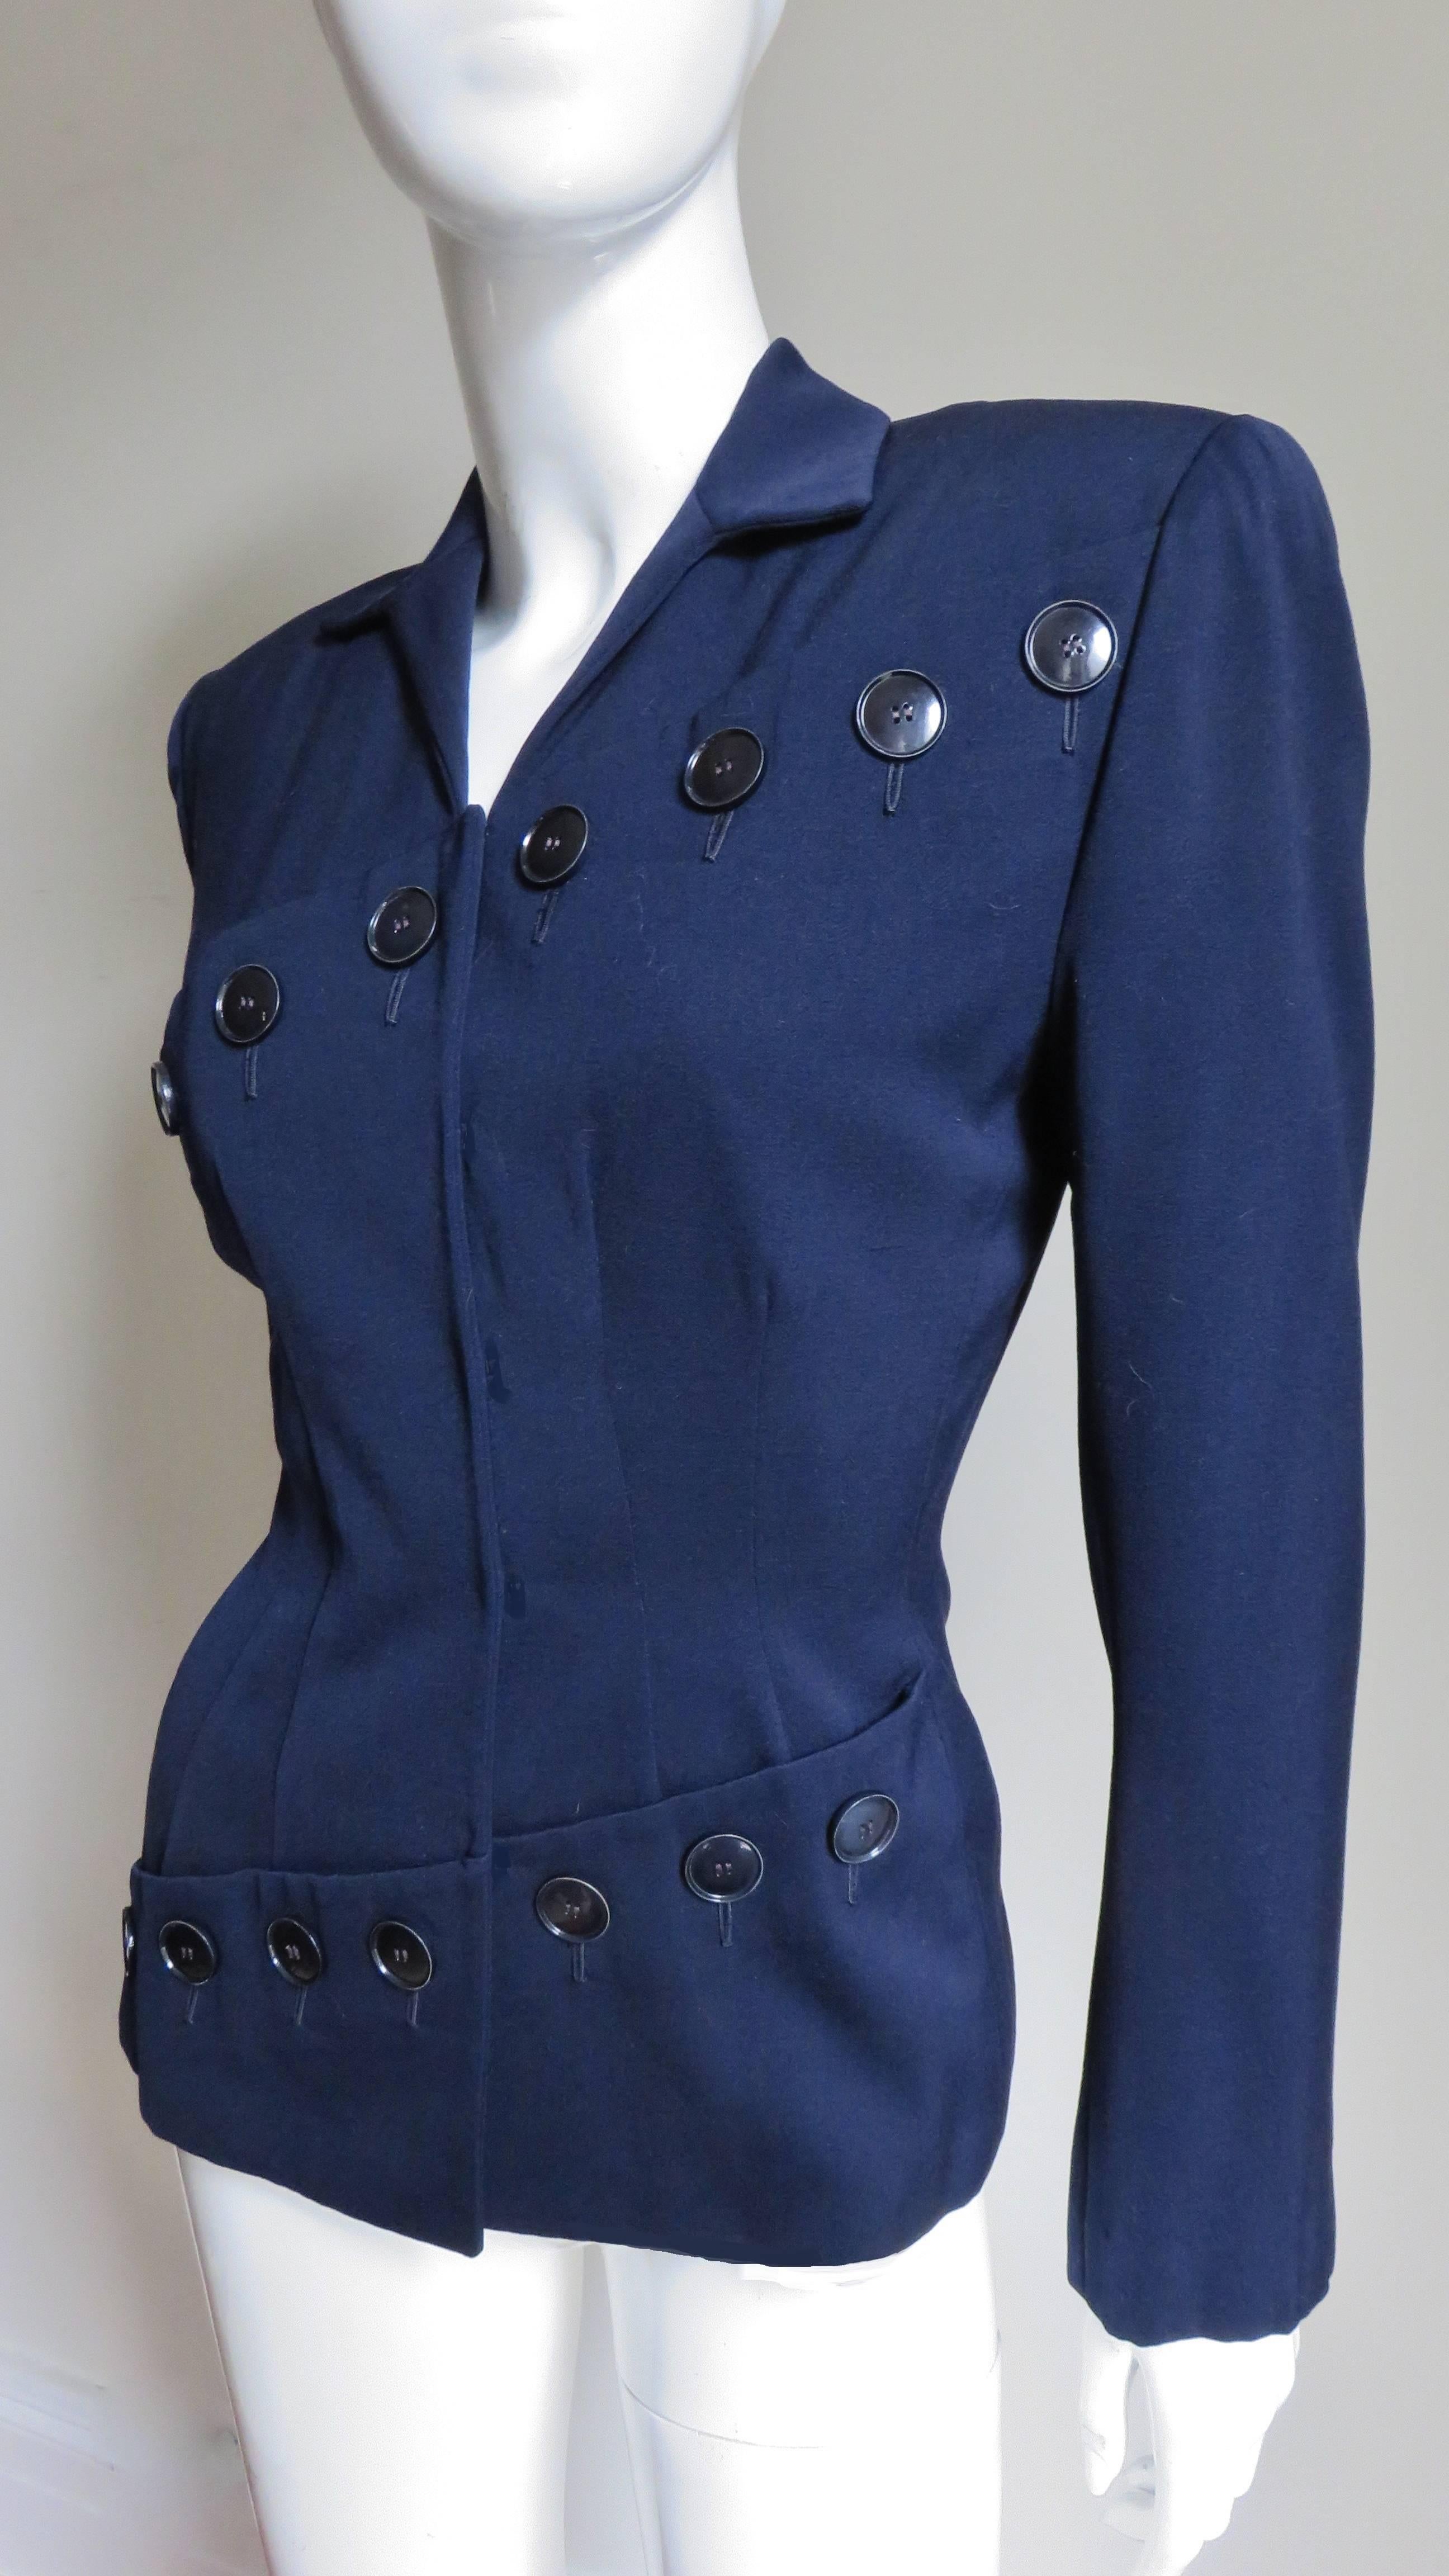 A fabulous navy wool jacket by Lilli Ann. It has the dramatic look of the 1940's with the shoulder padding and nipped in waist. The jacket is unique with the double diagonal row of buttons one across the chest and the other across the hips.  It is